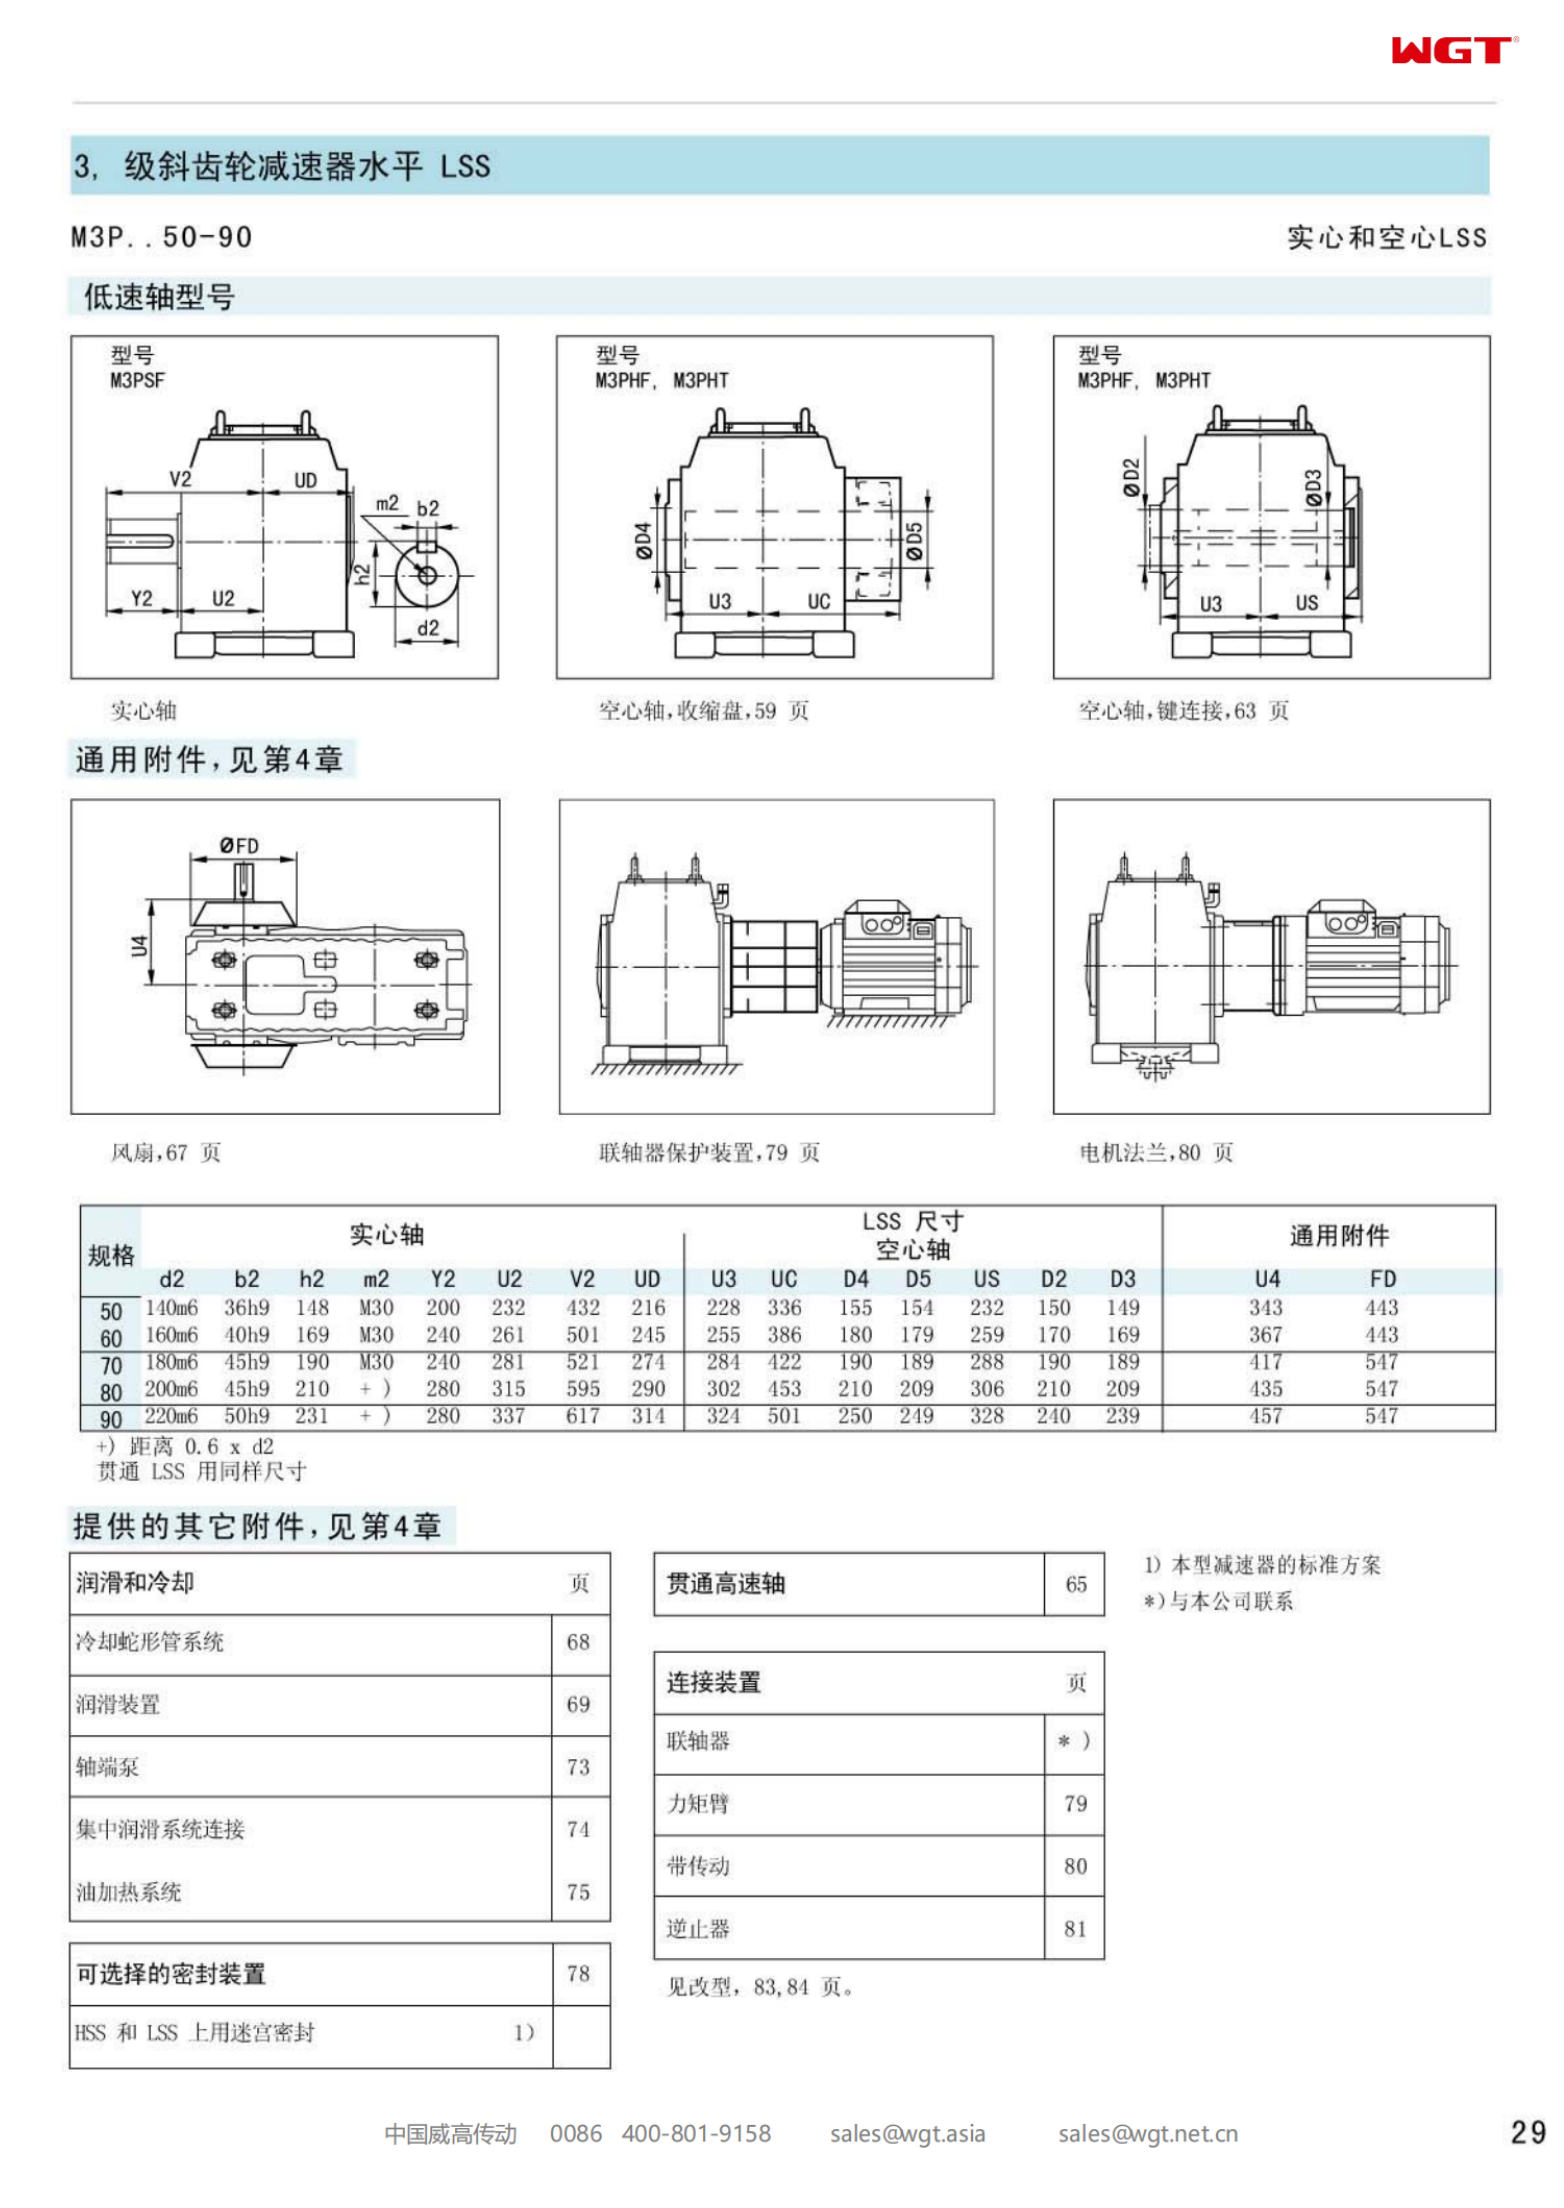 M3PHF80 Replace_SEW_M_Series Gearbox